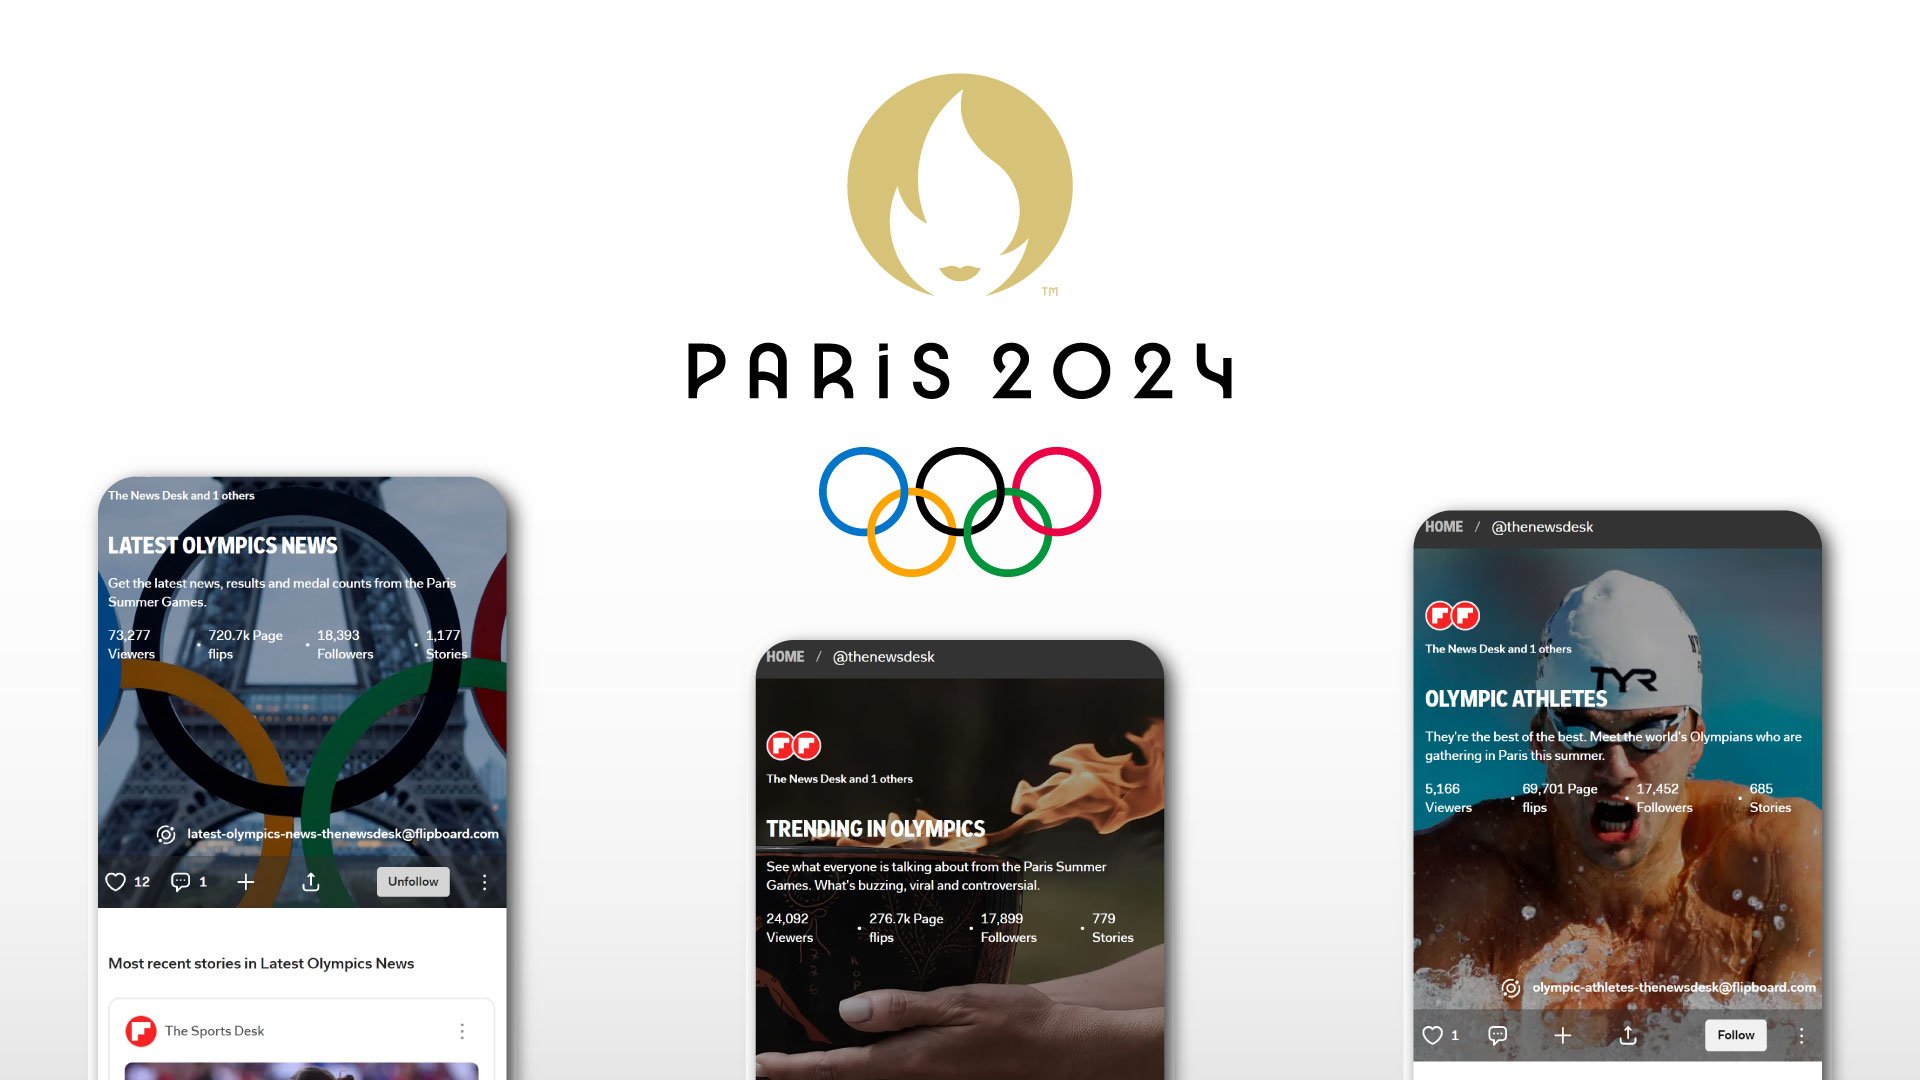 Paris Olympics: Follow the triumphs and controversy